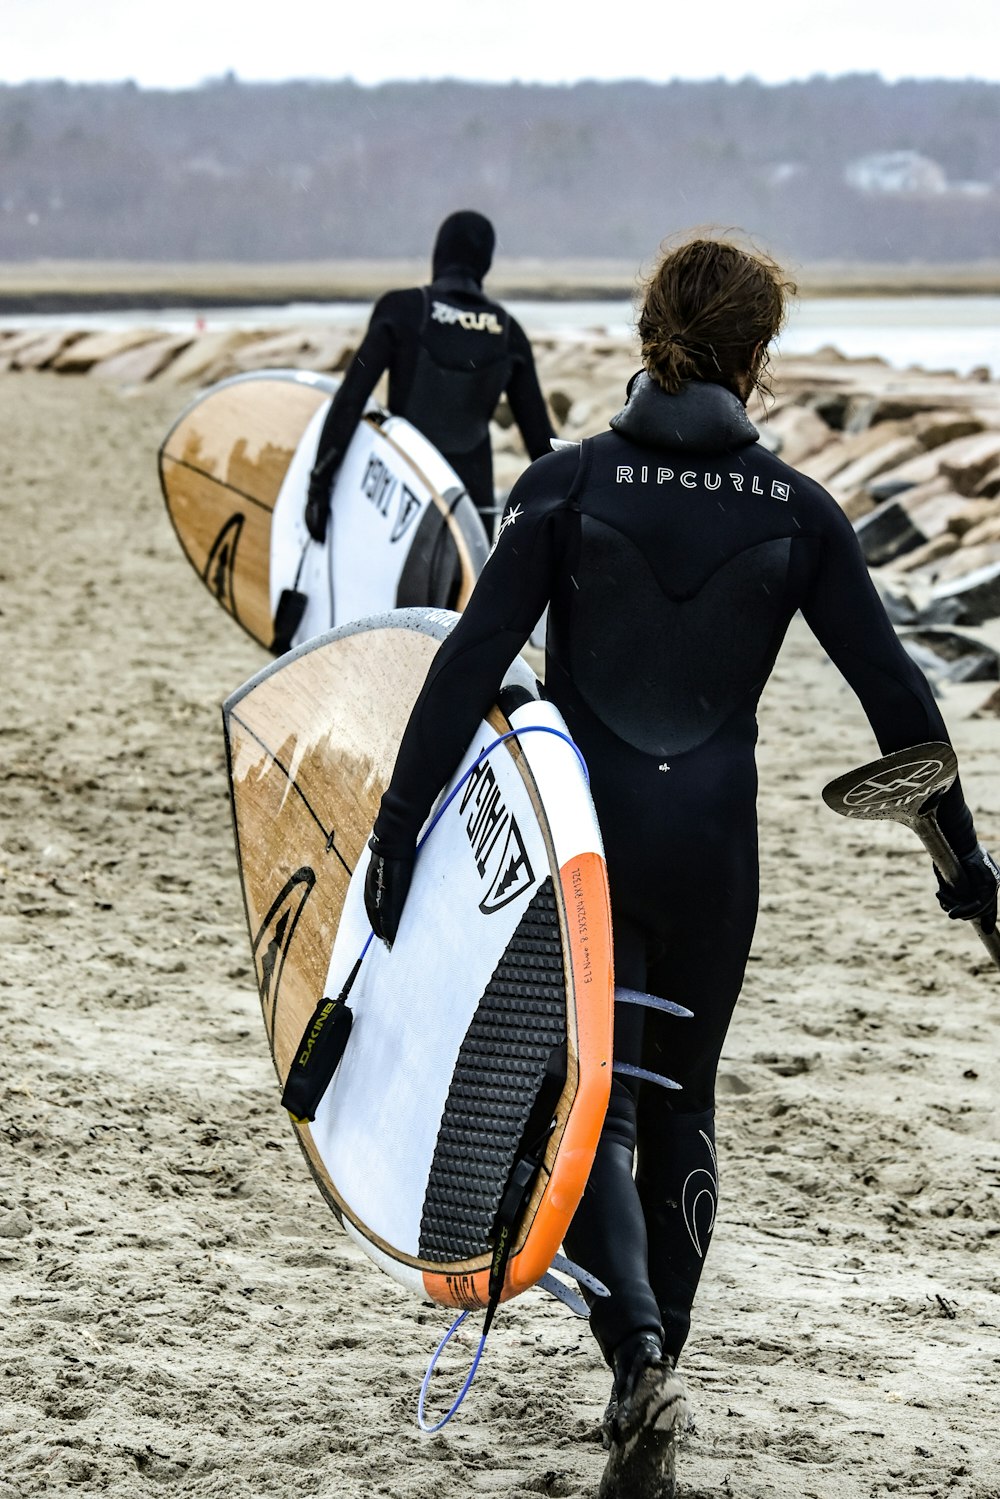 two person walking towards body of water while carrying surfboards